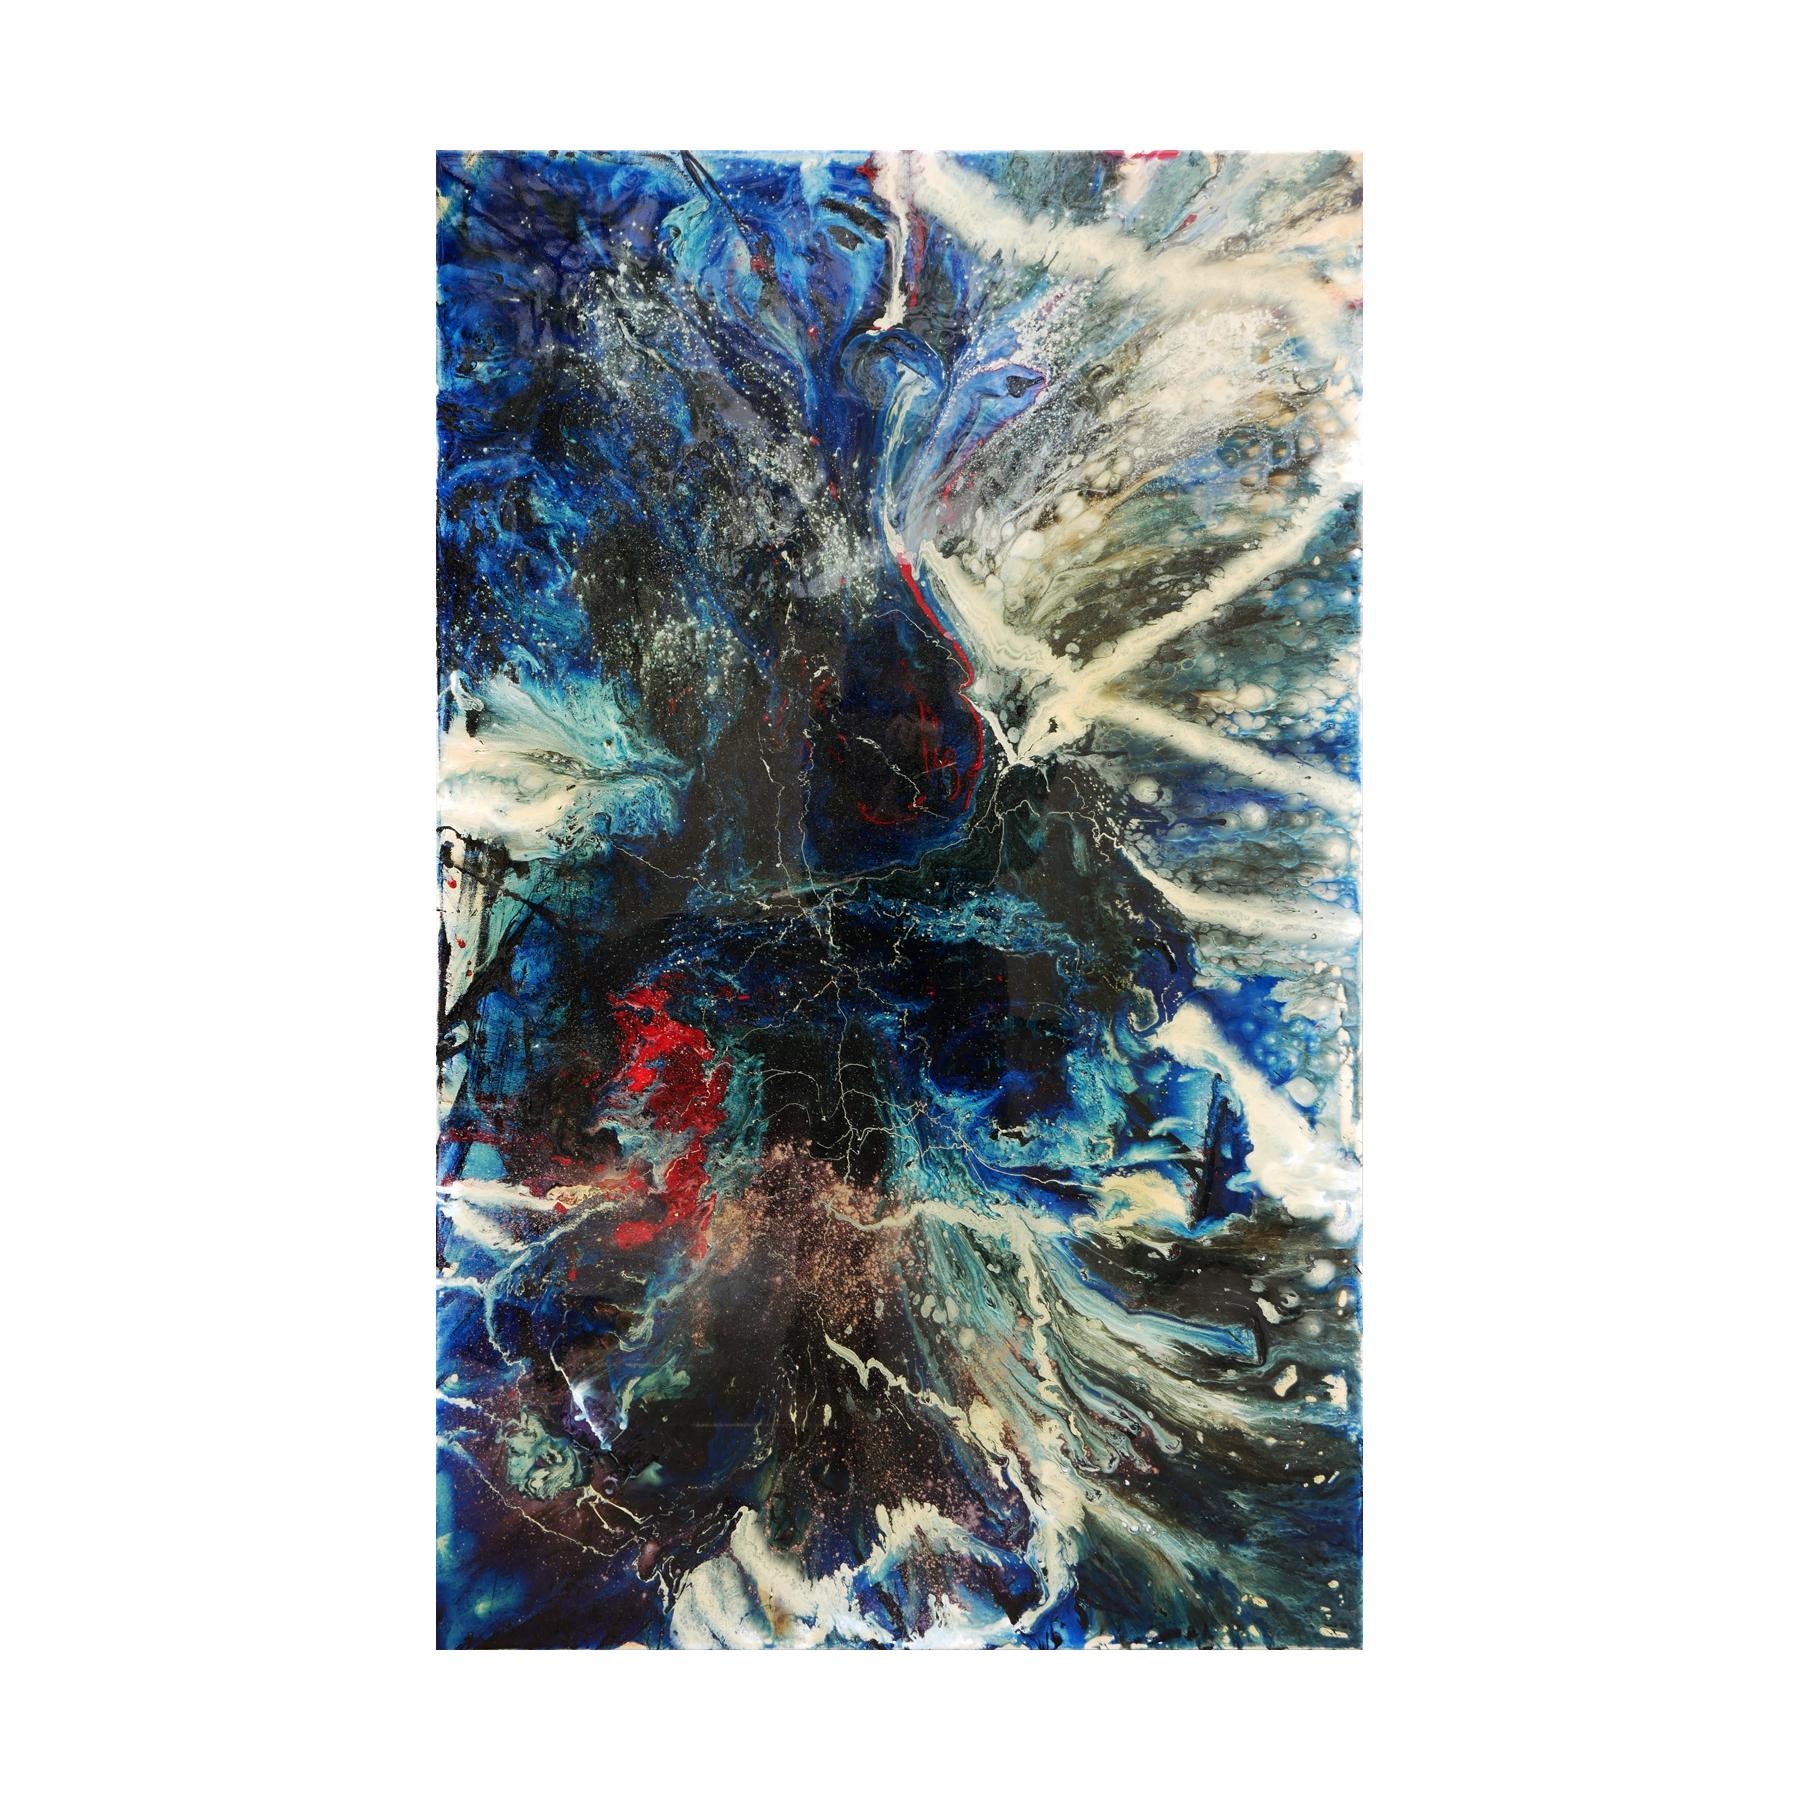 Blue, black, white, and red abstract expressionist painting by artist 